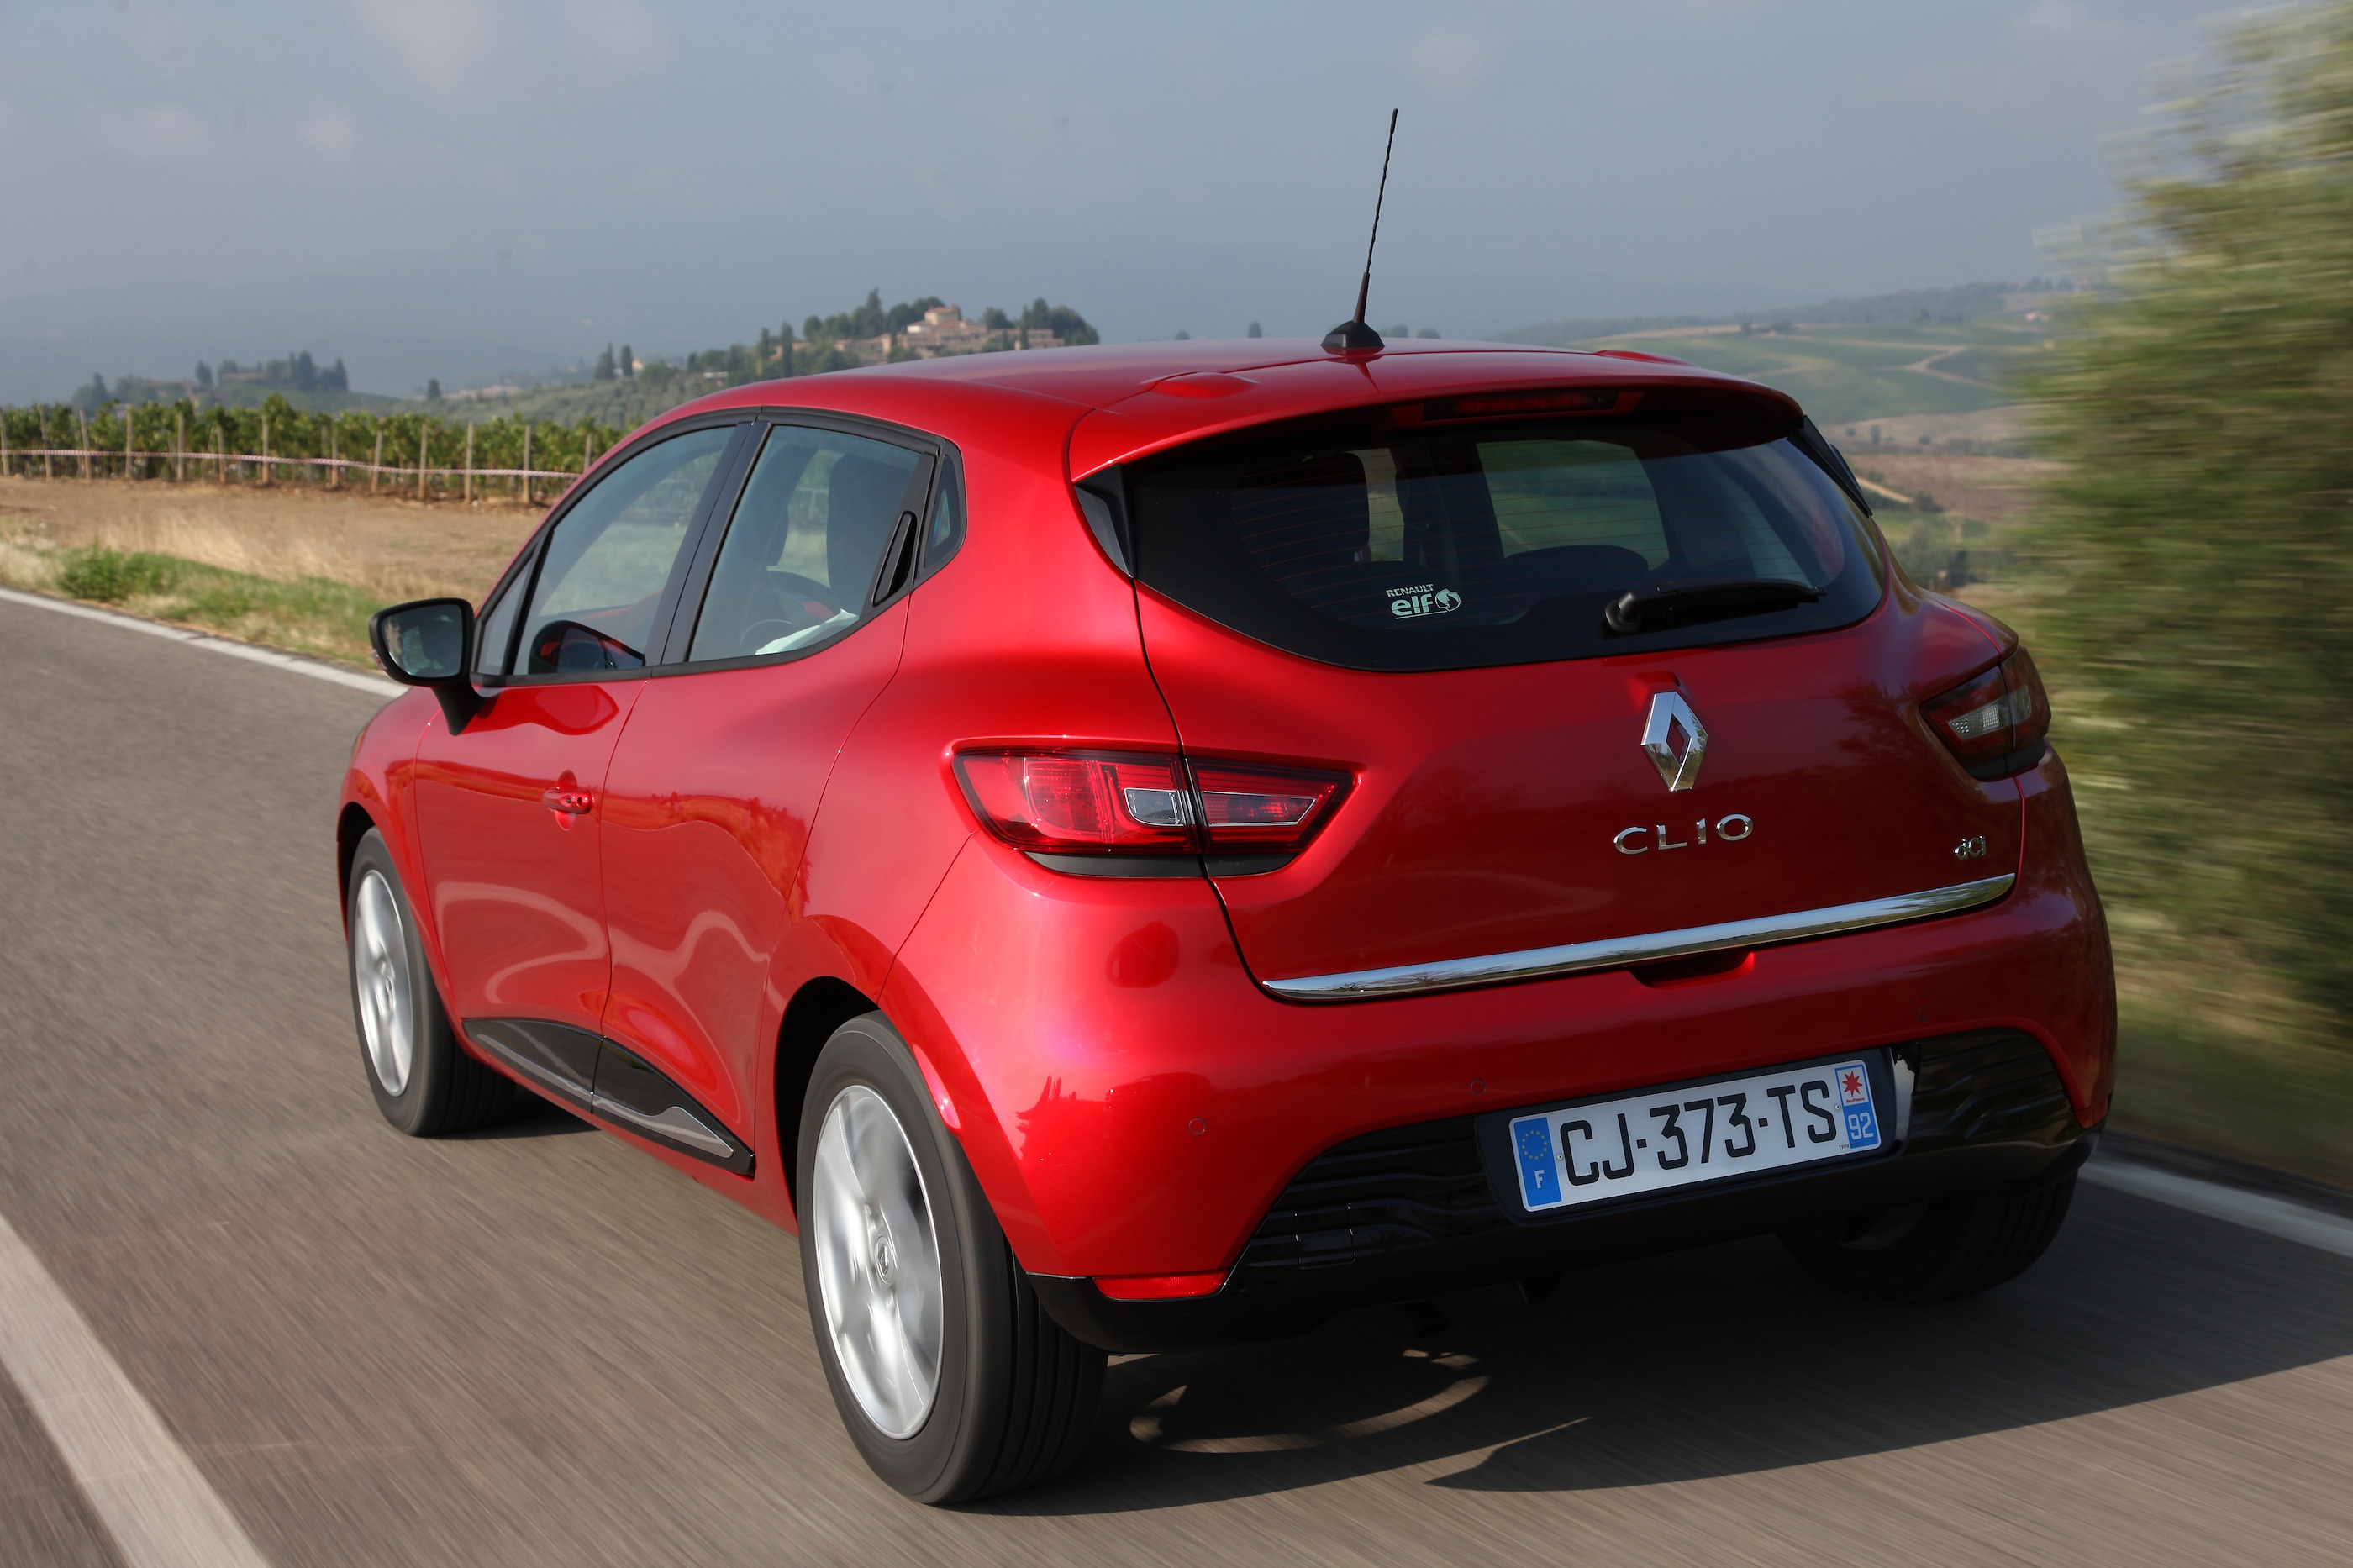 Vehicles Renault Clio HD Wallpaper | Background Image